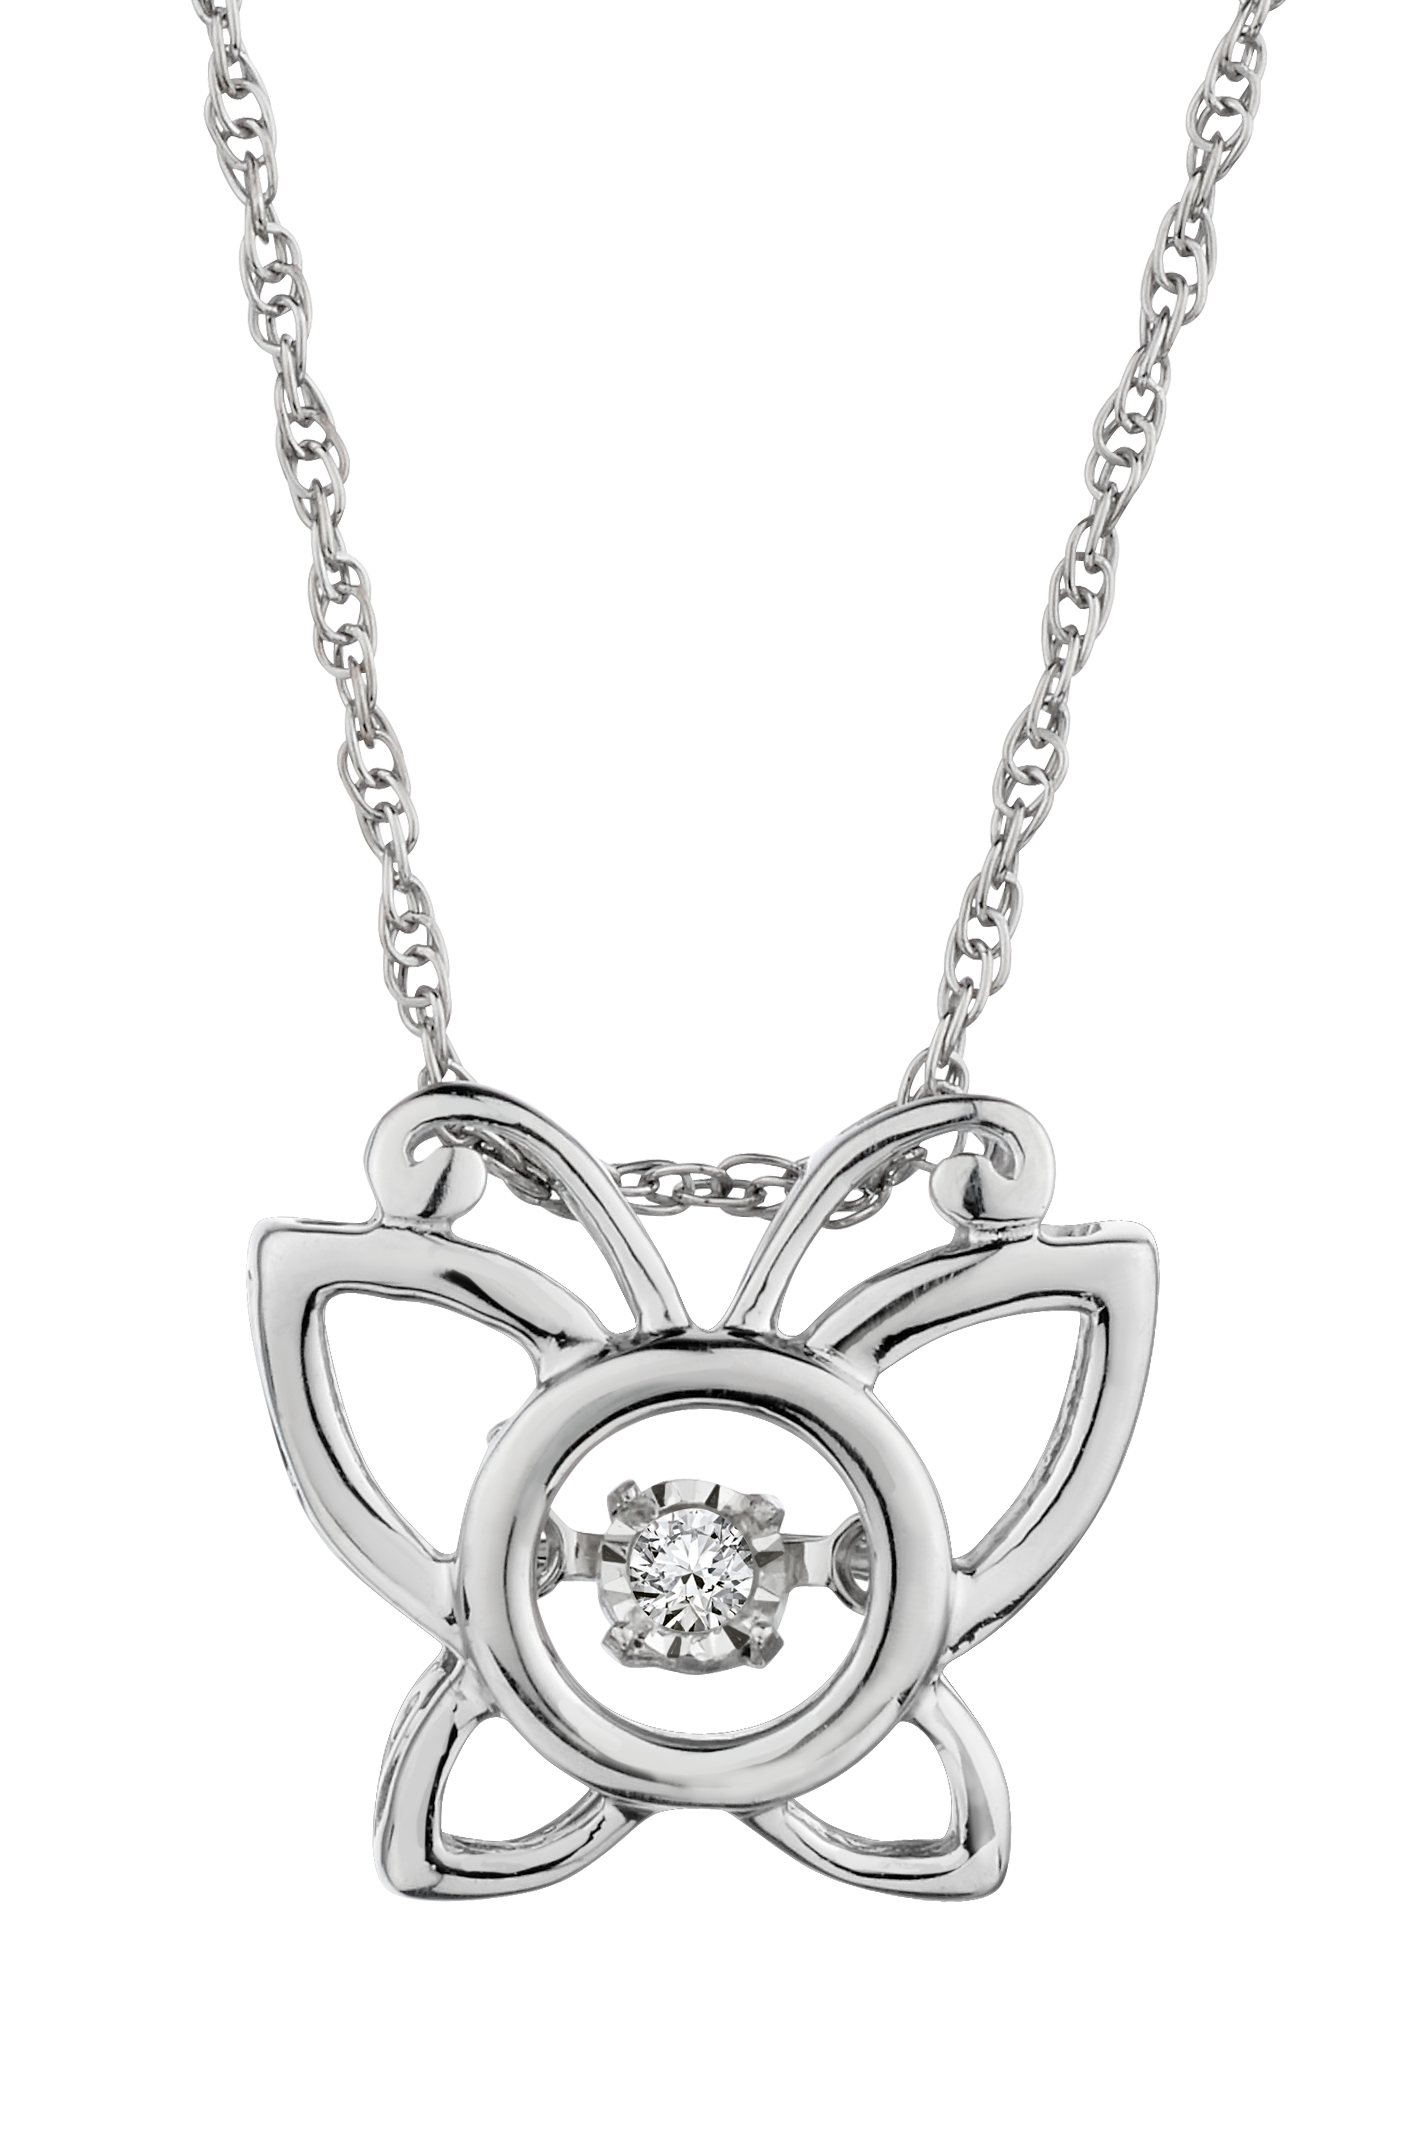 .025 Carat of Diamond, "Shimmer" Butterfly Pendant, Sterling Silver.....................NOW